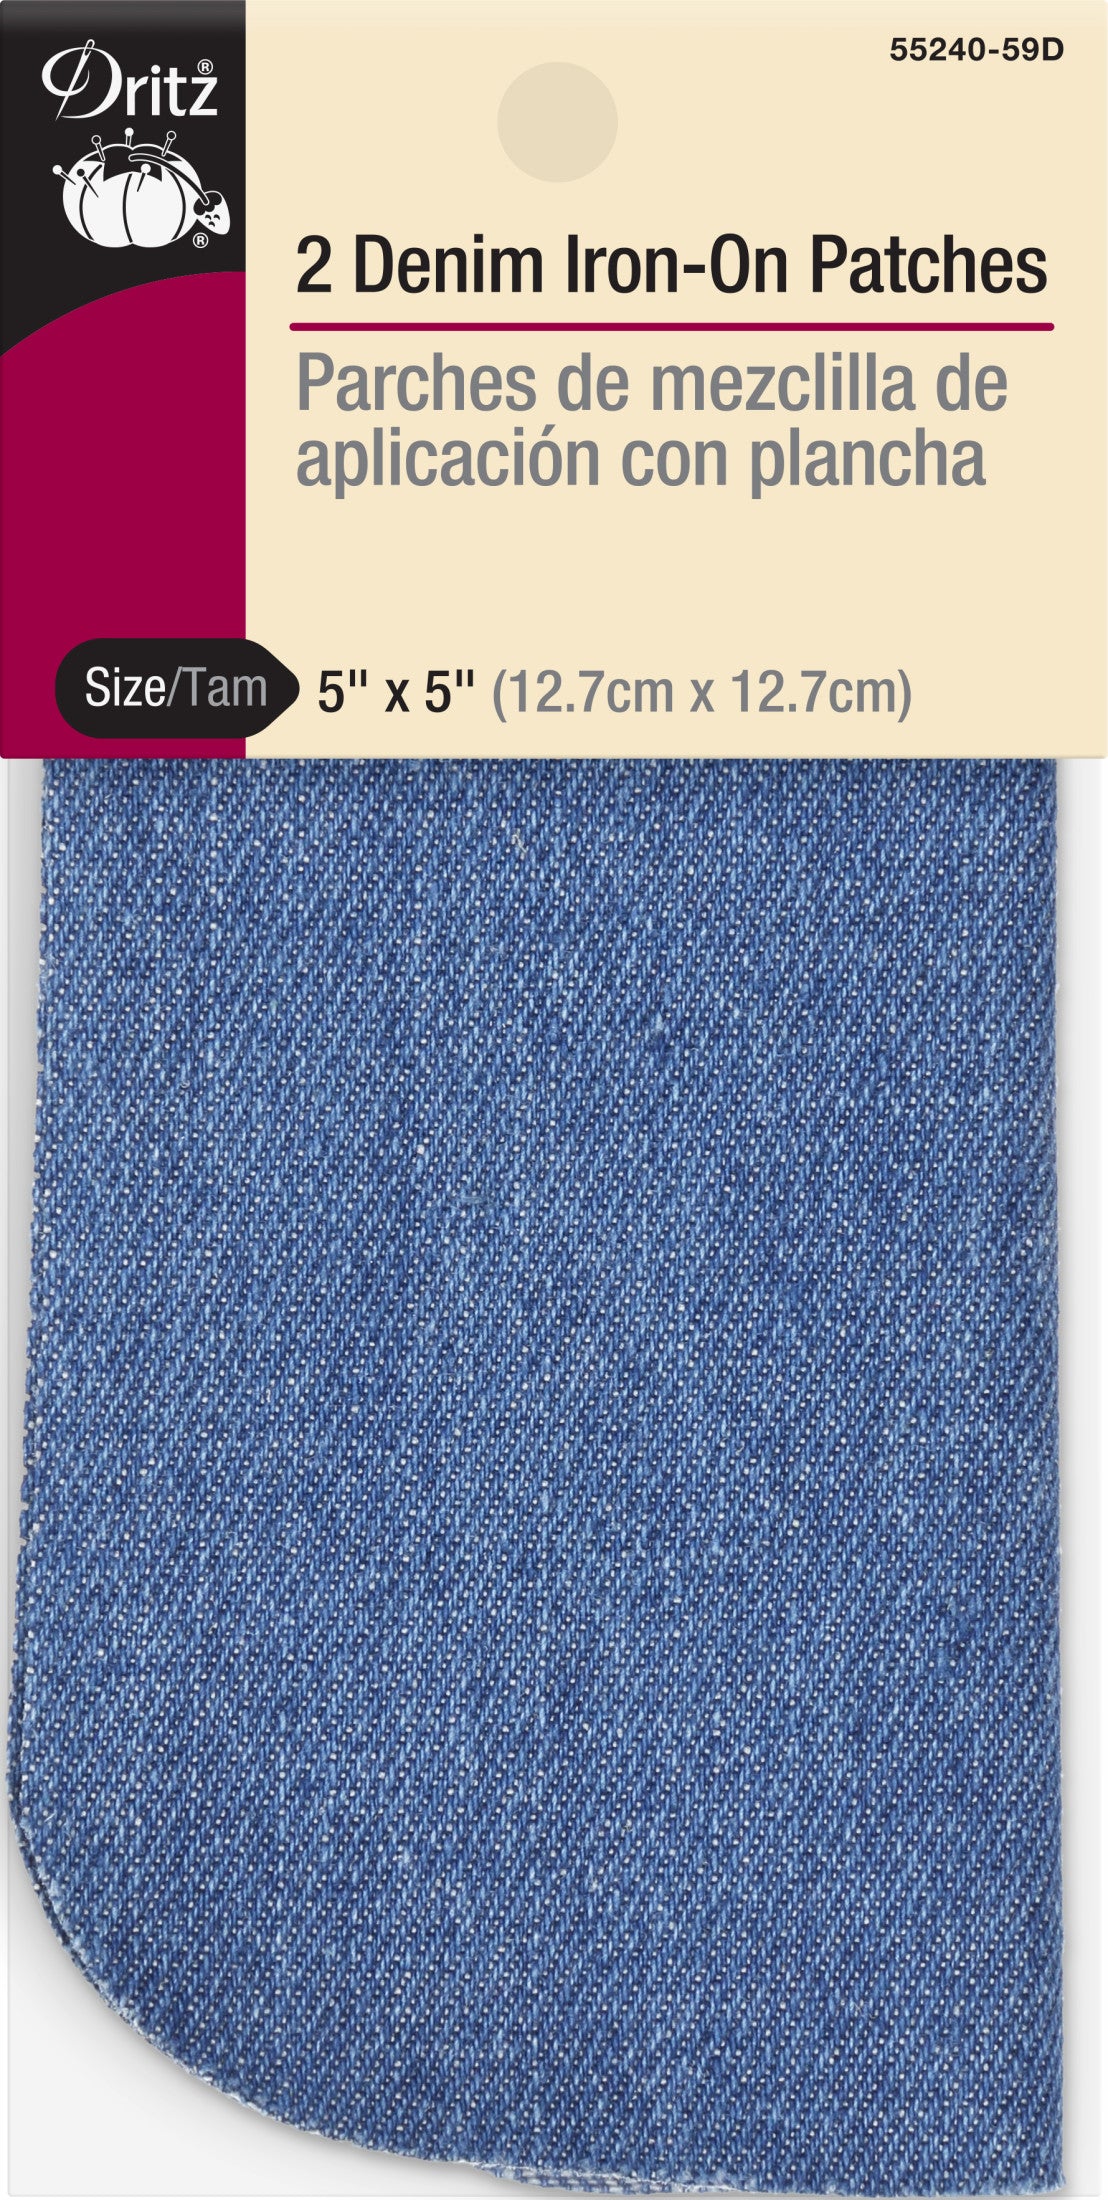 Singer Iron-on Patch Repair Kit Assorted Denim- Pack of 12 : Amazon.in:  Home & Kitchen